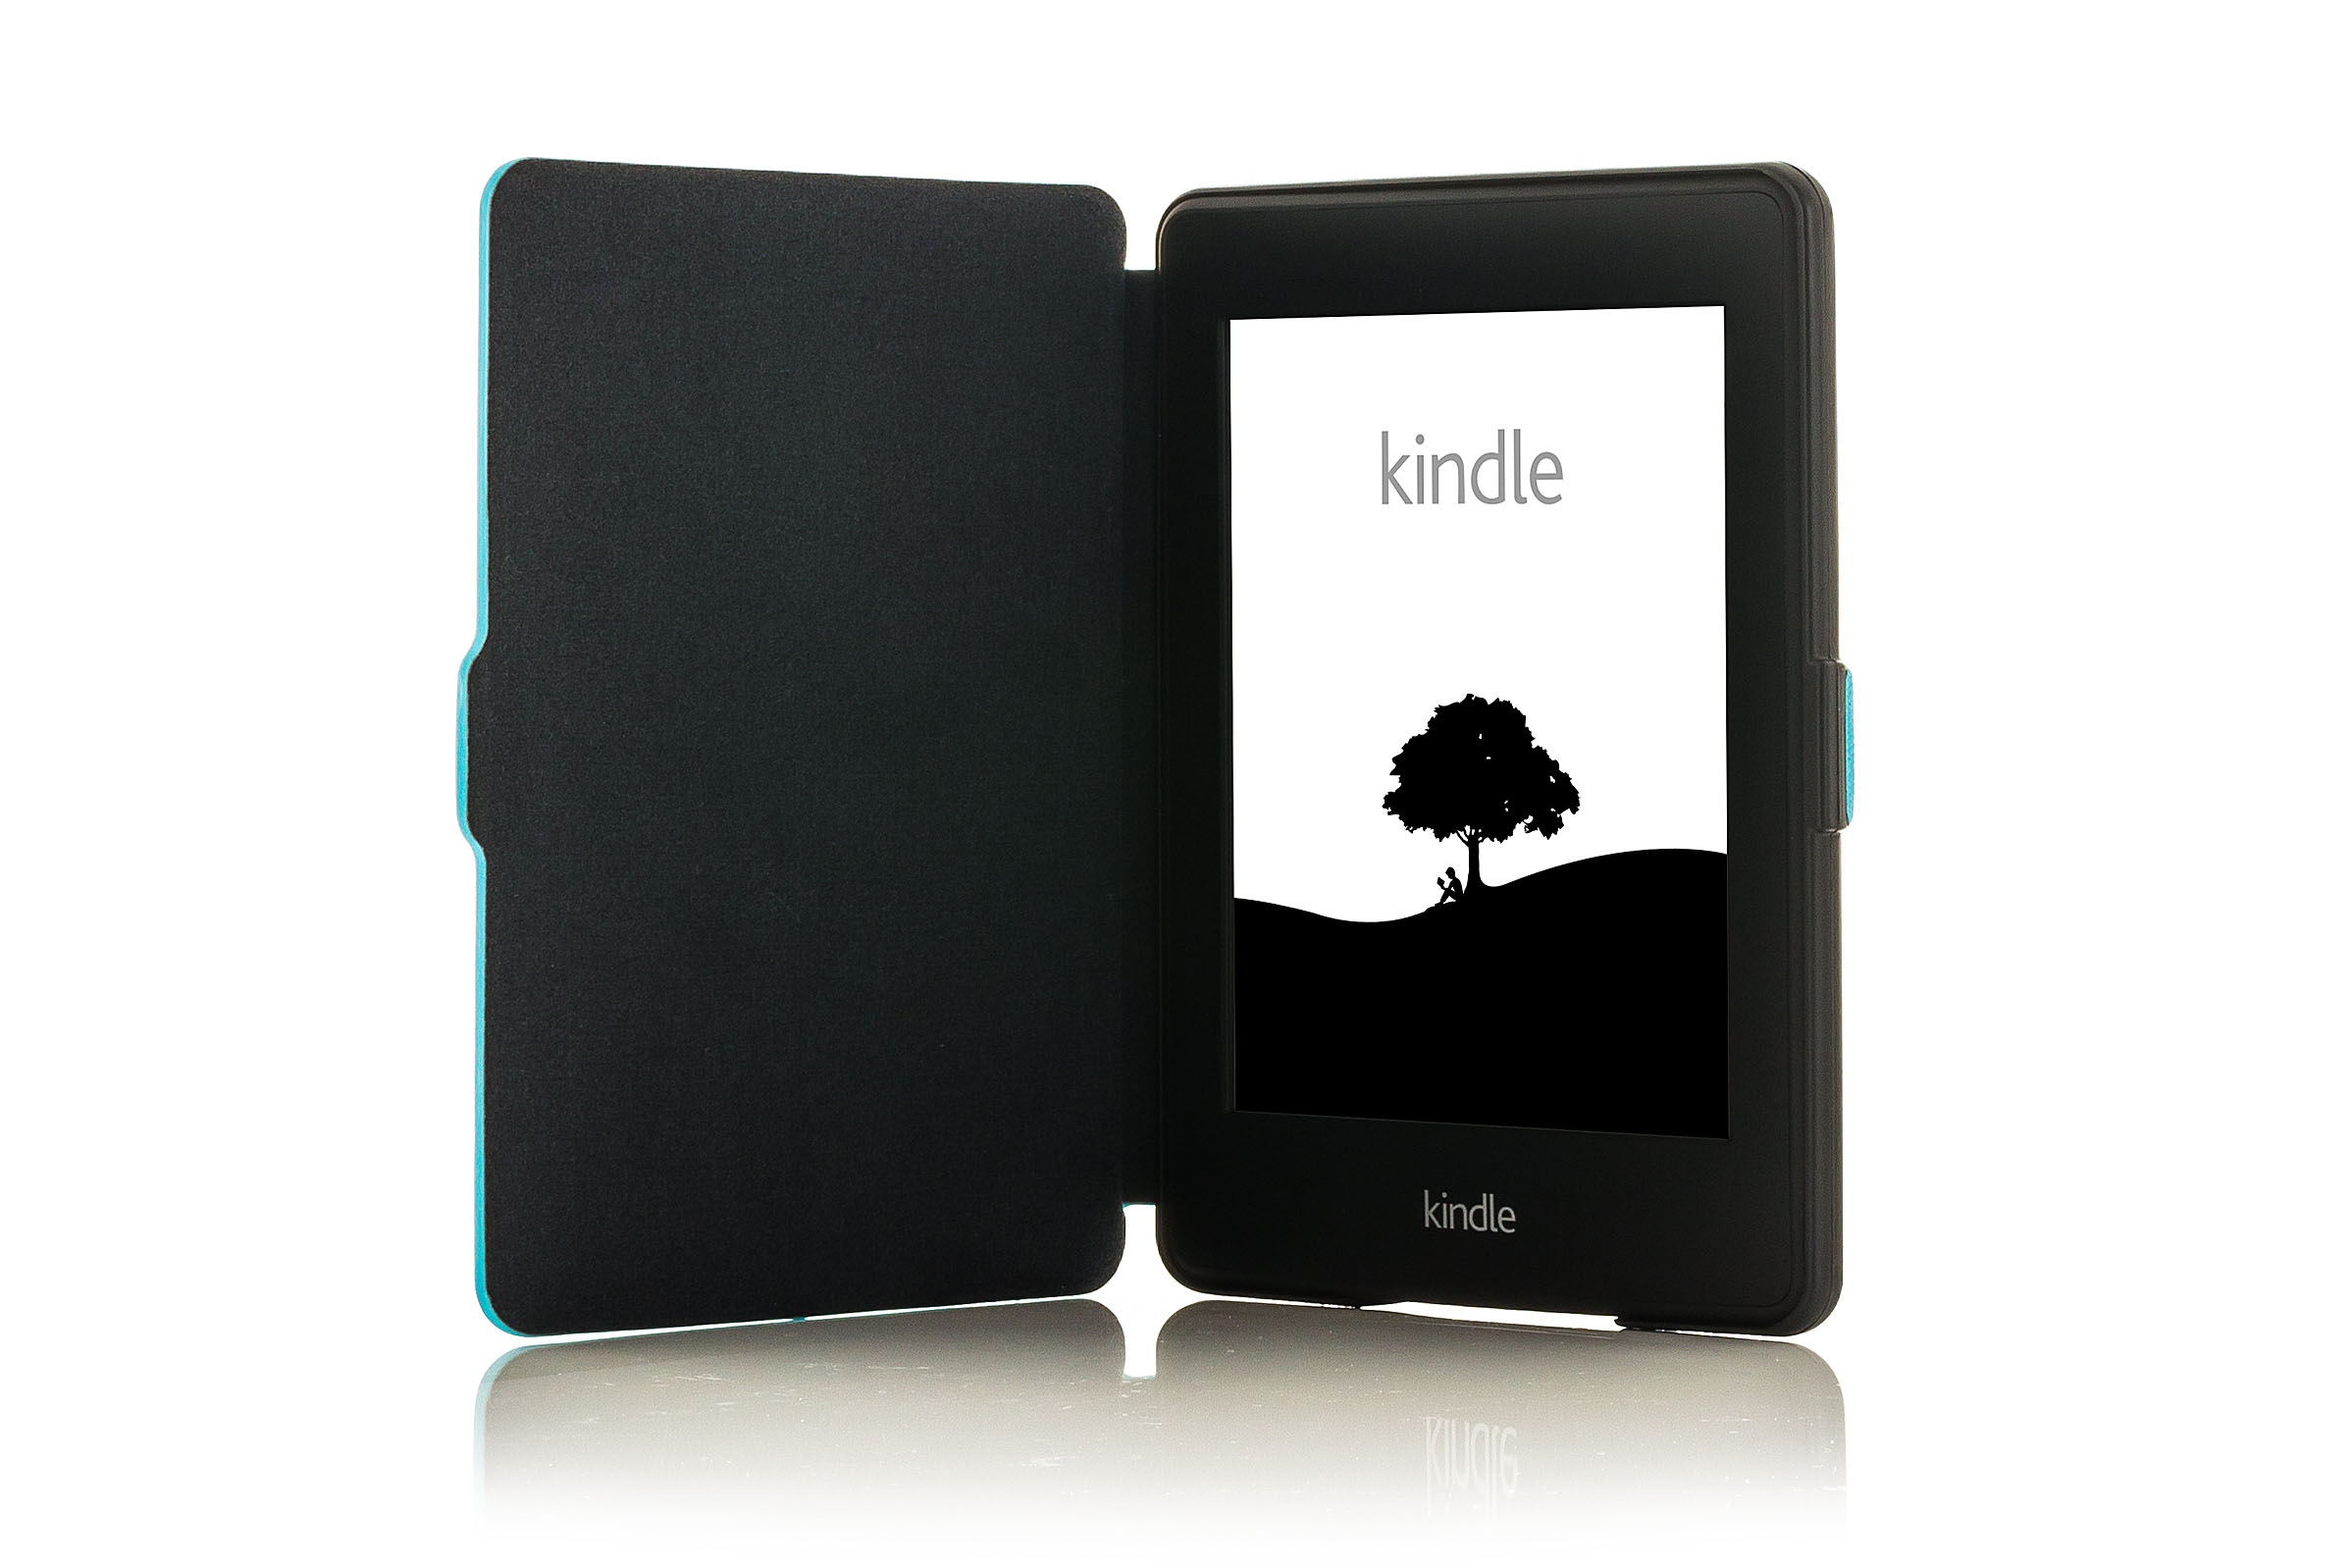 Easiest way to send e-books to your Kindle